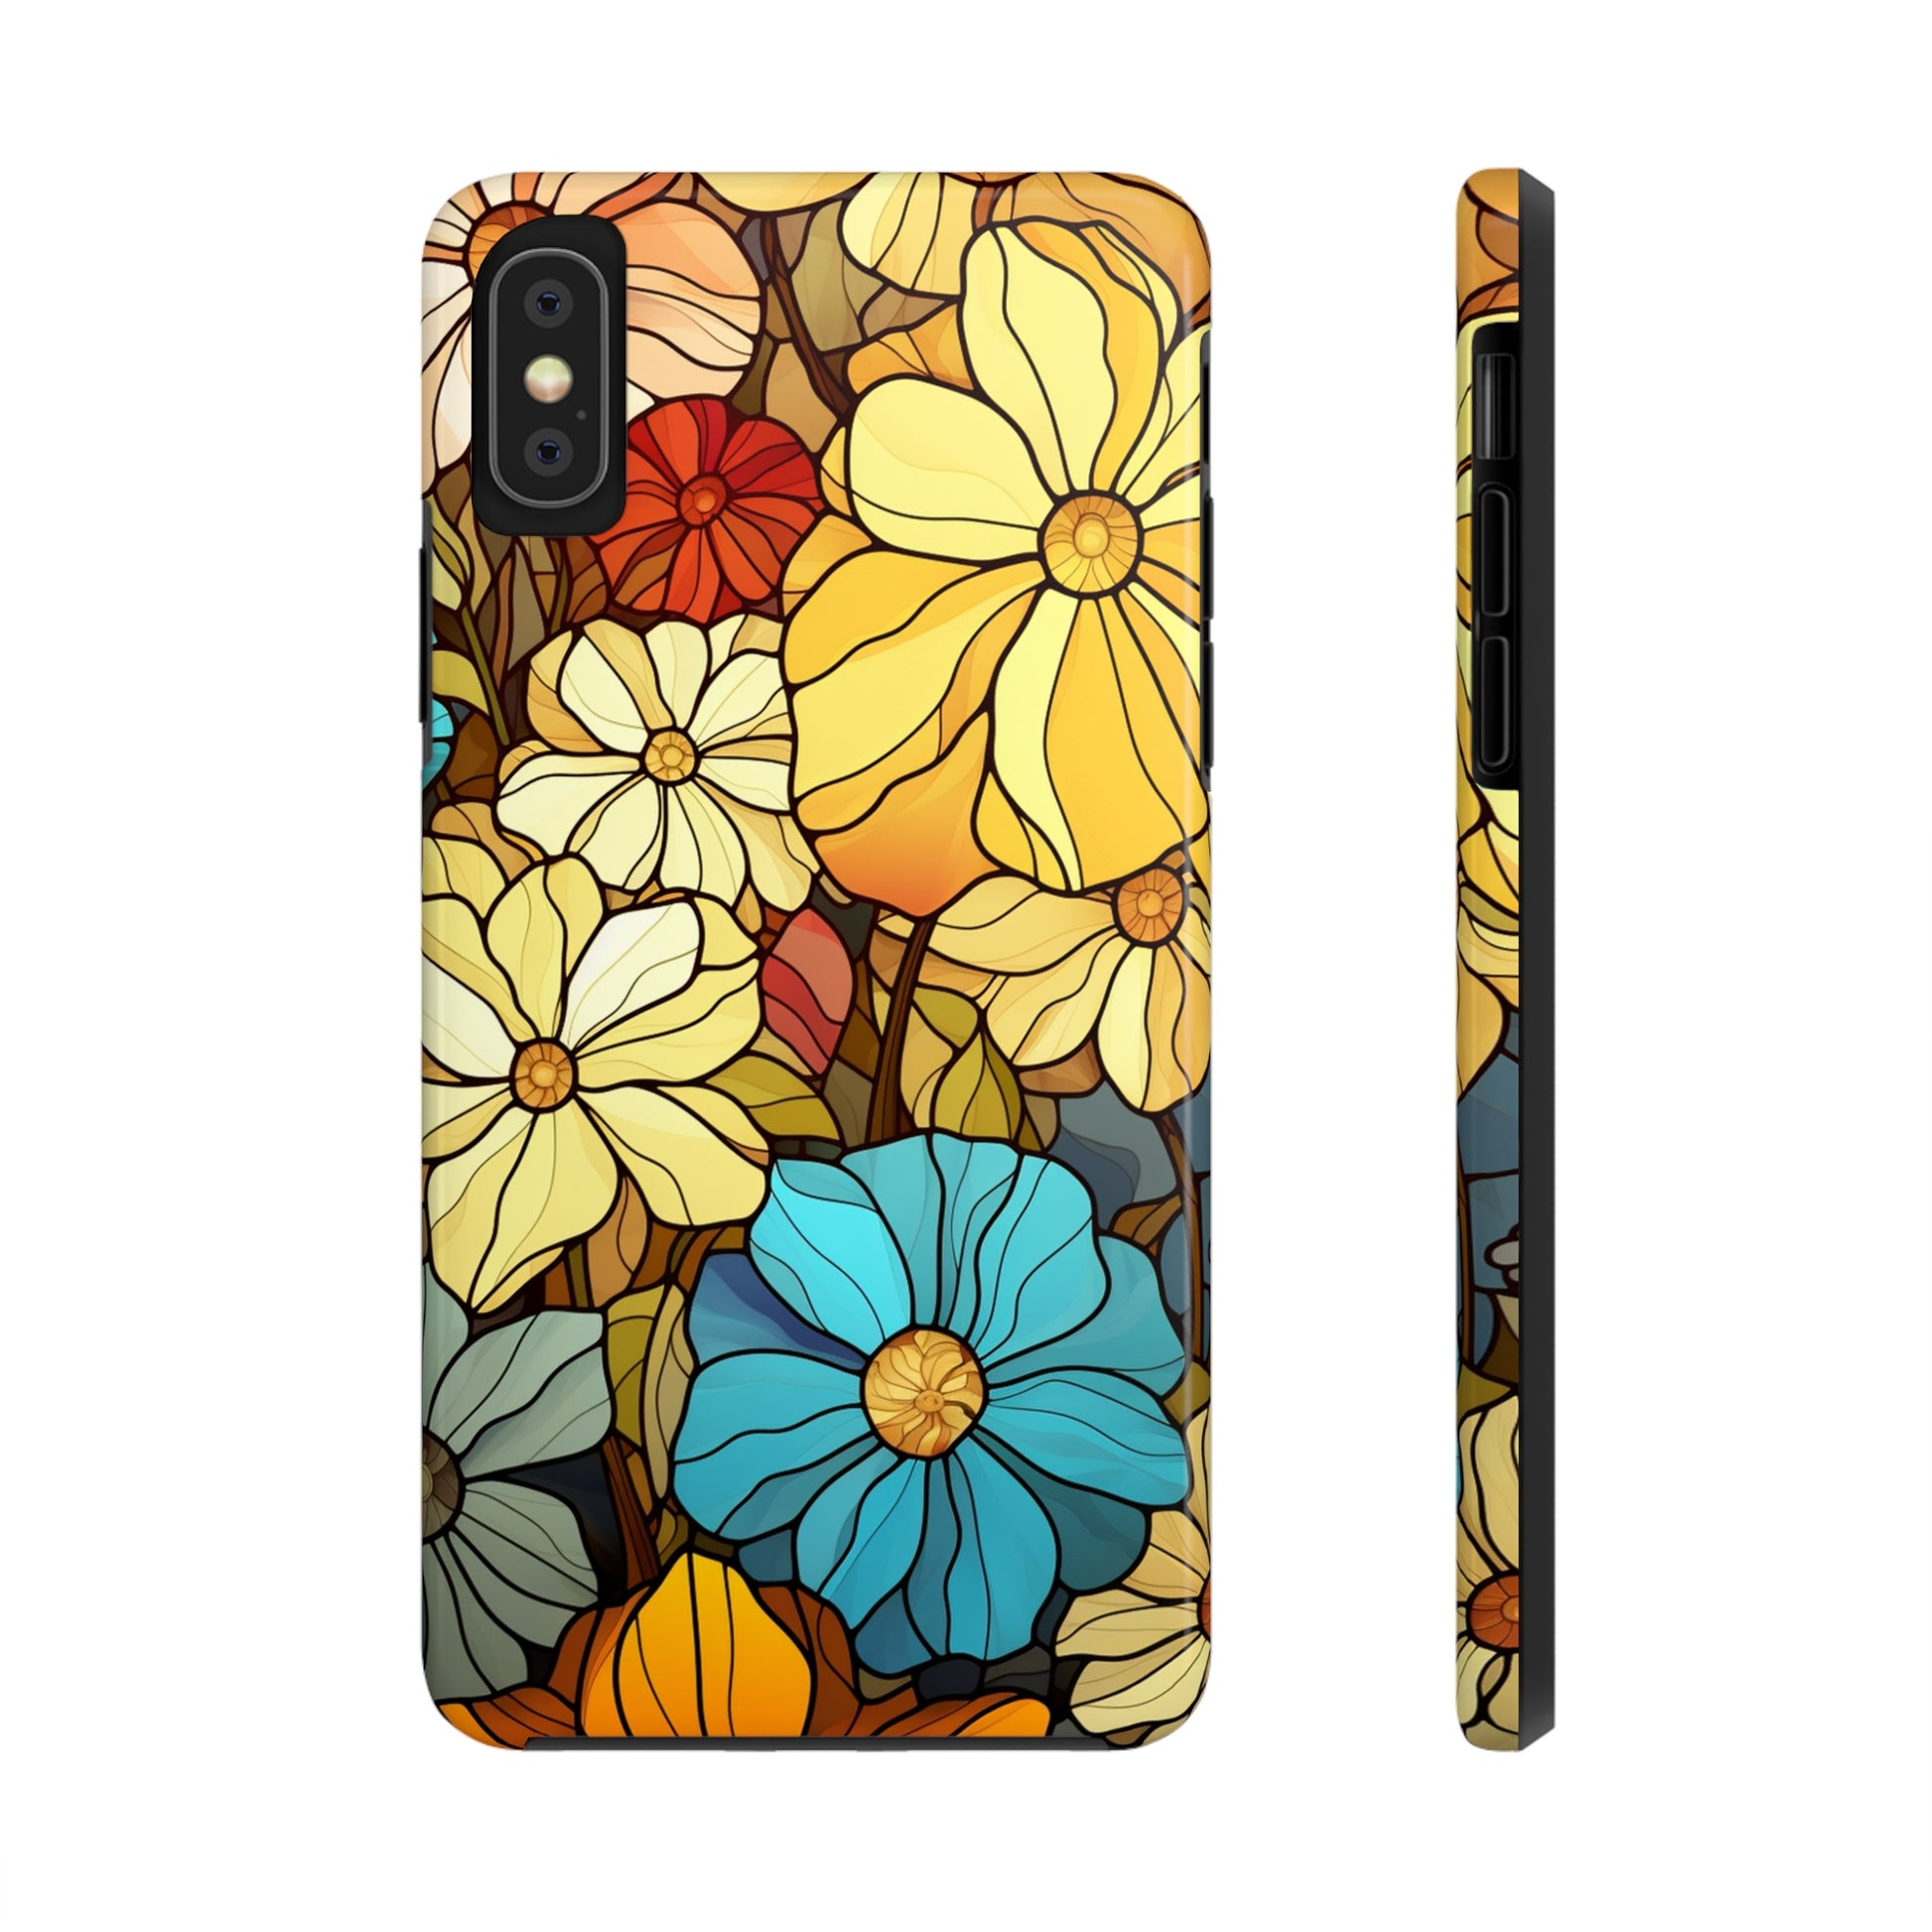 iPhone case with stained glass vintage floral design